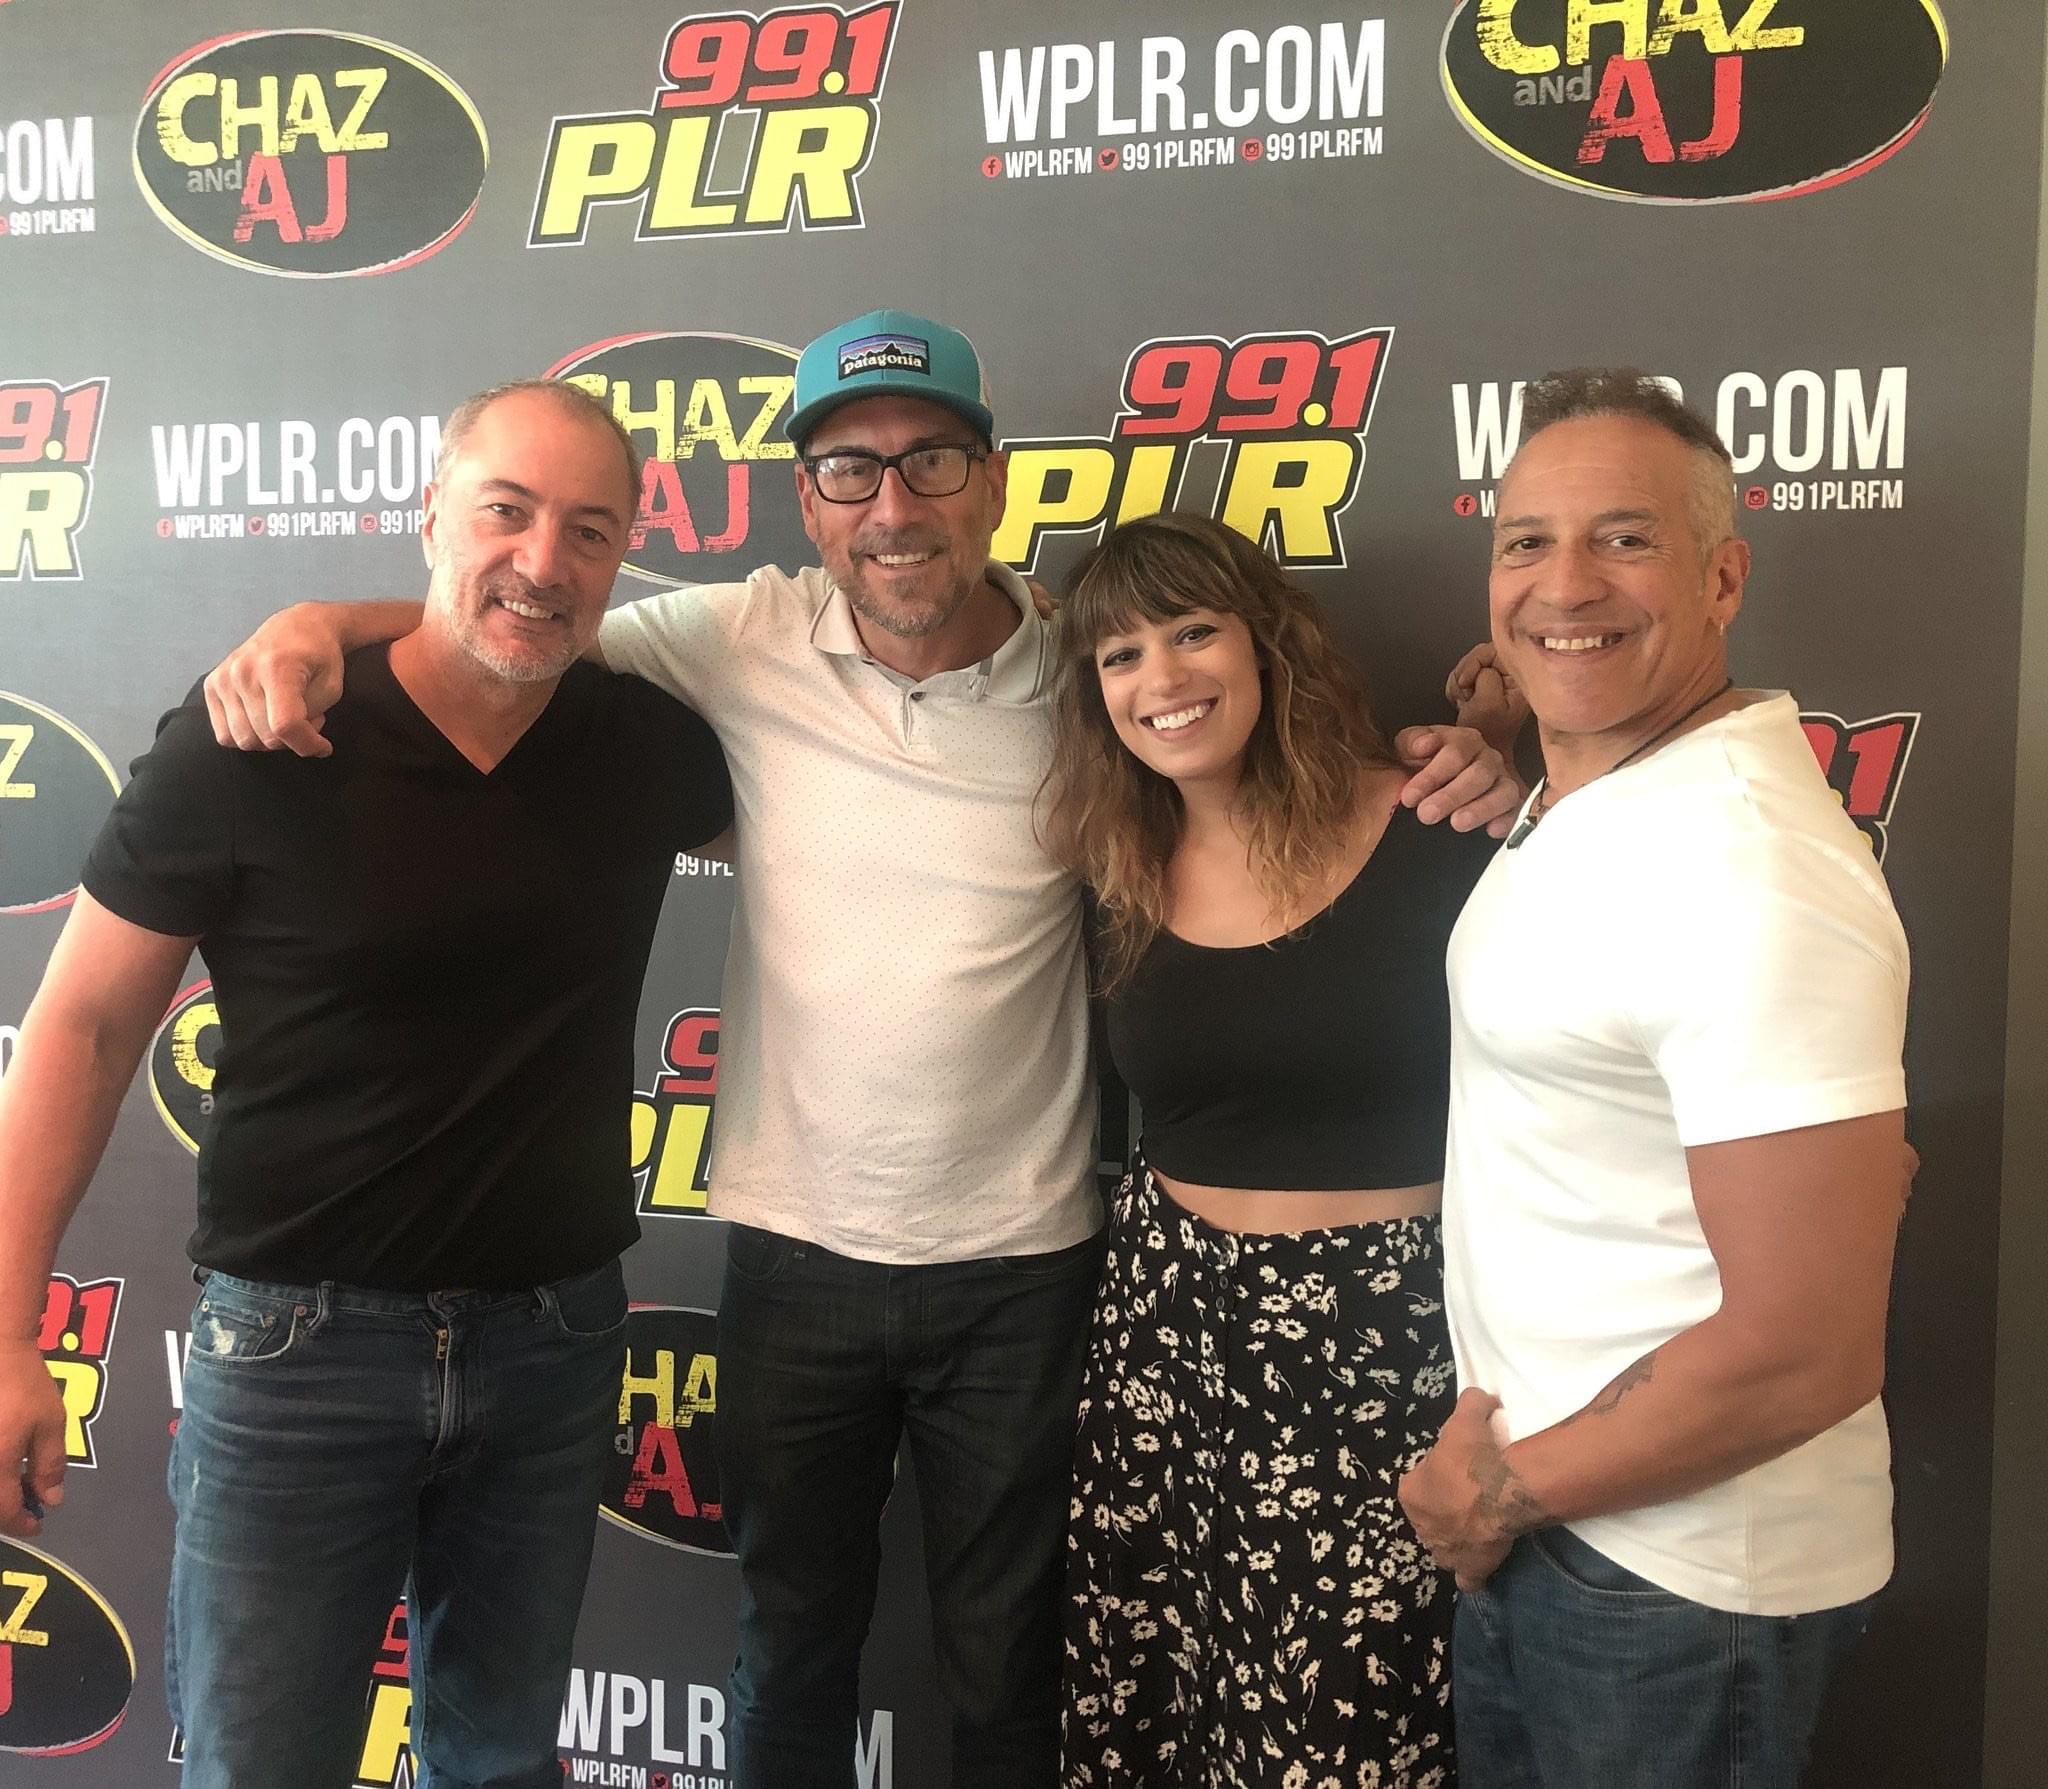 PODCAST – Thursday, June 6: Comedian Joe Matarese Stops By, The Governor’s Ball Fiasco, And The Latest On The Missing New Canaan Mother